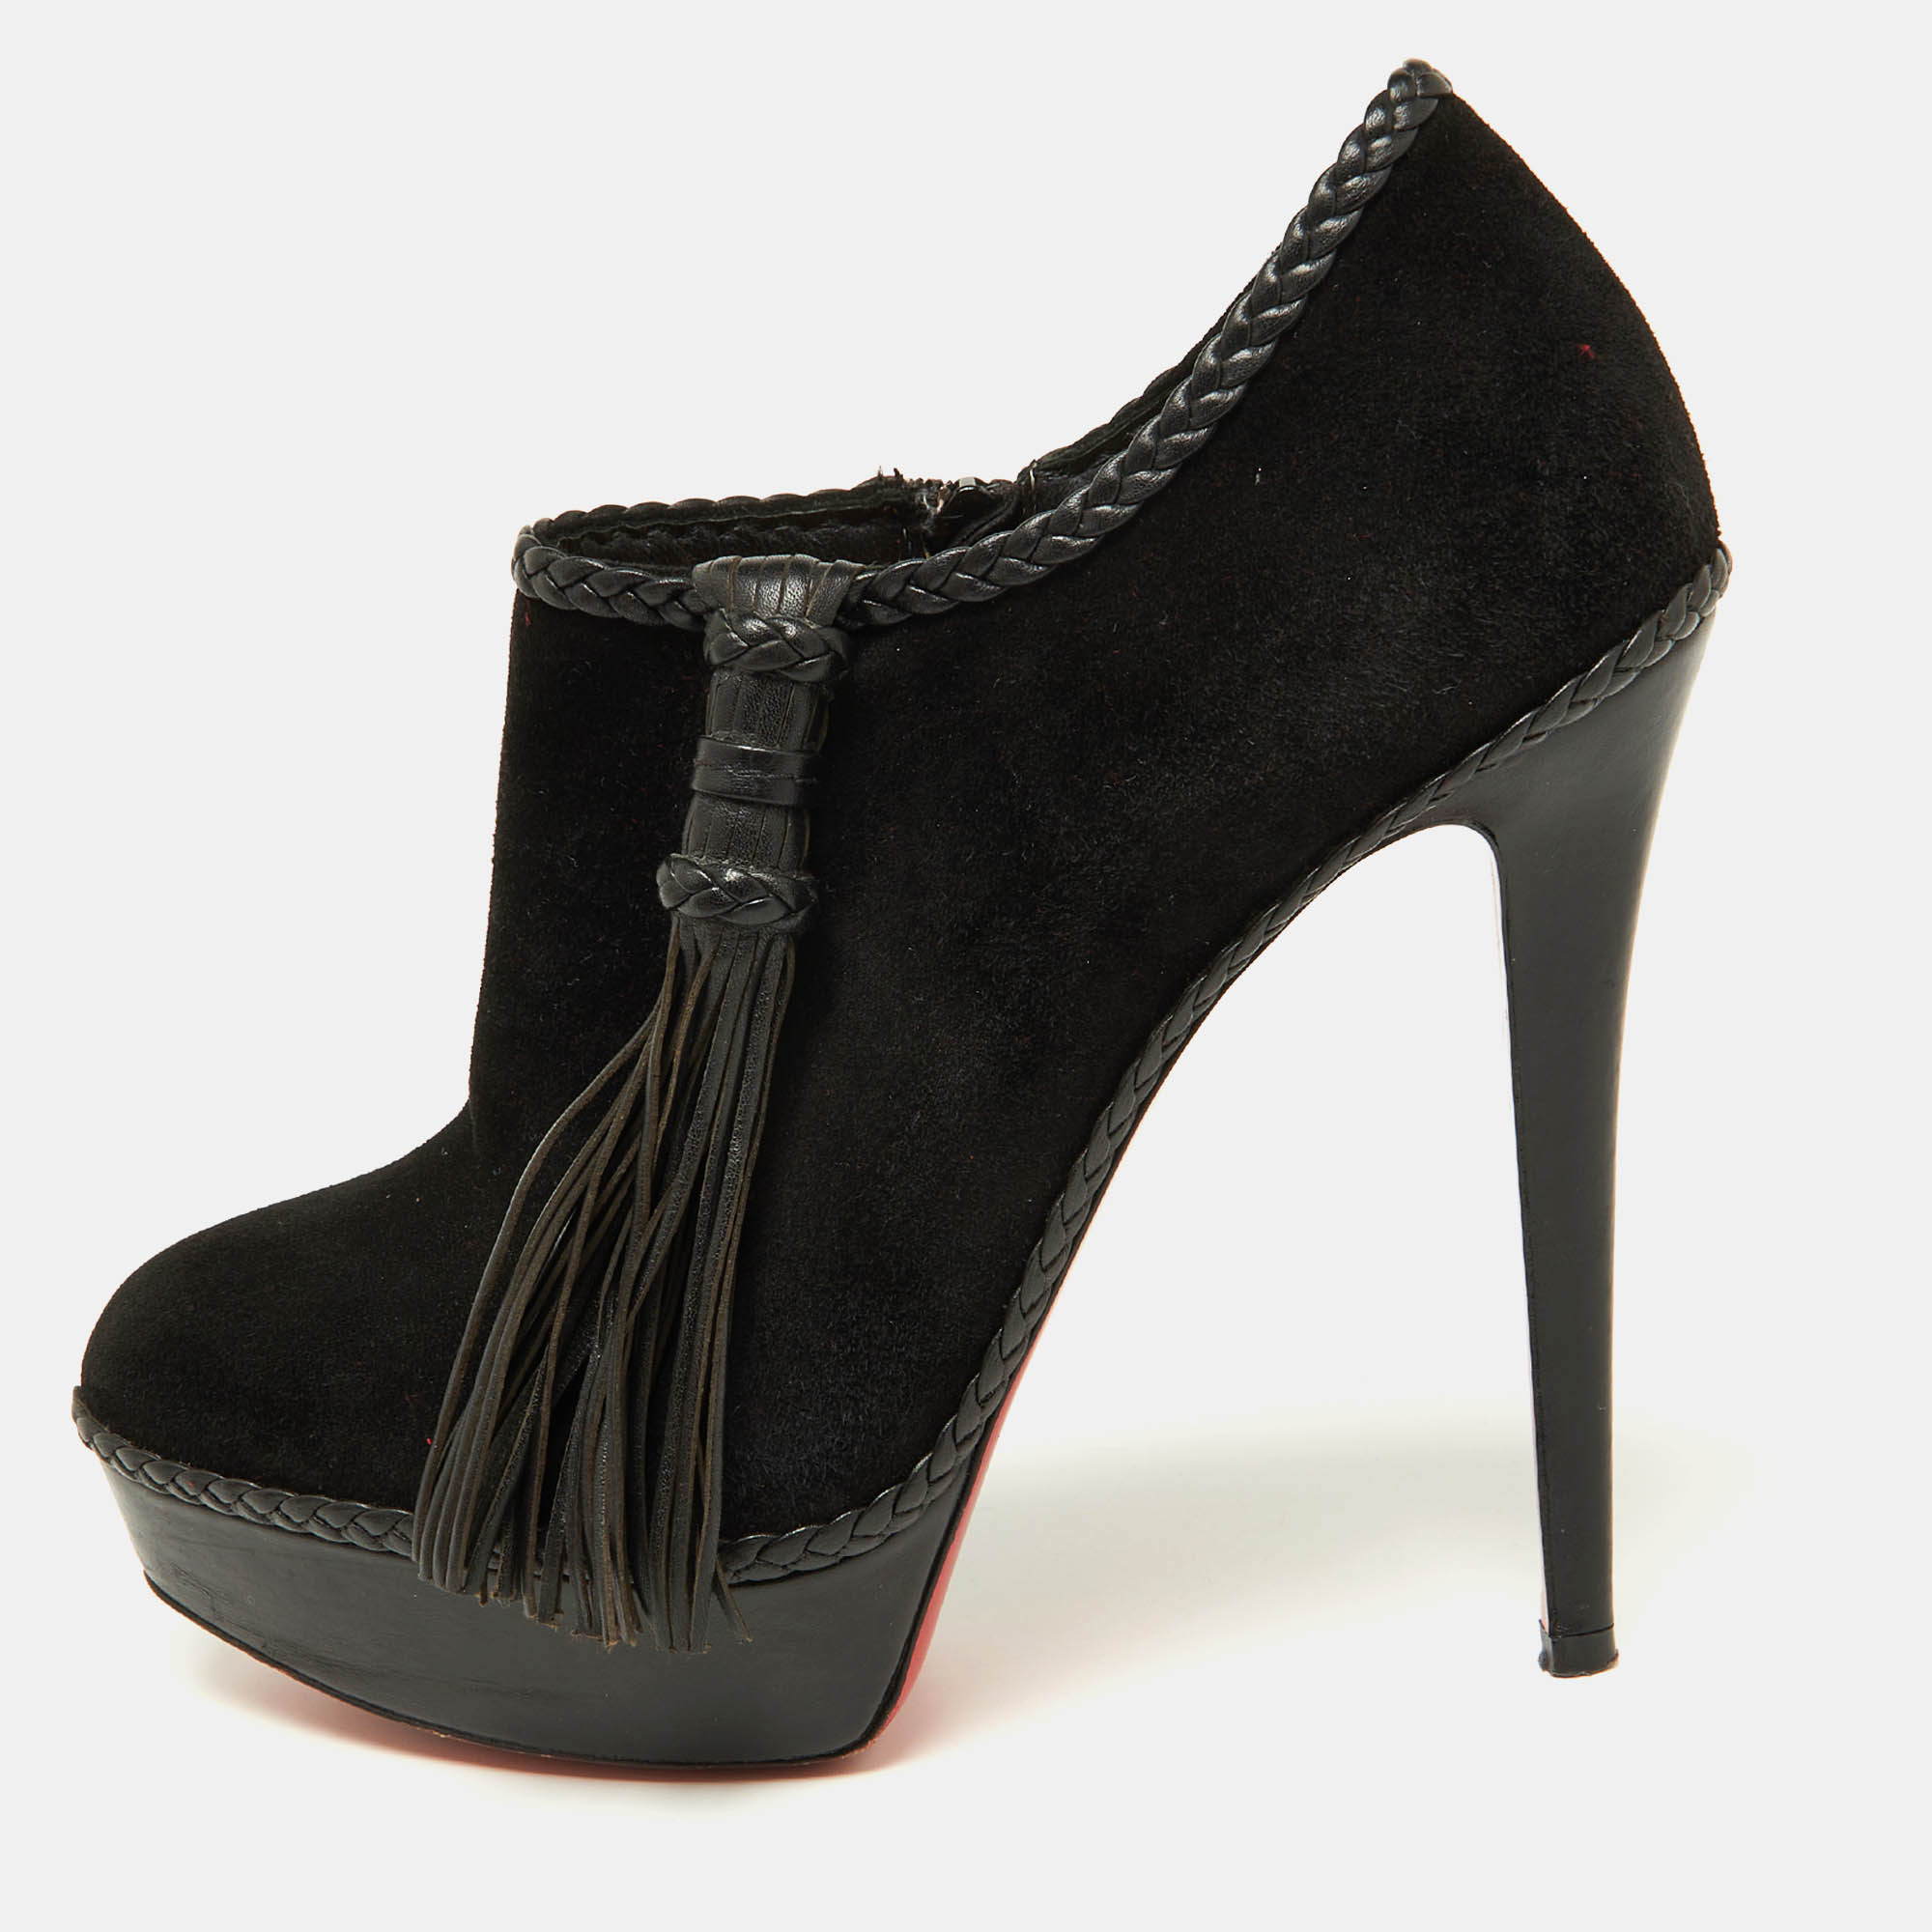 Christian louboutin black suede sultane ankle booties size 40.5